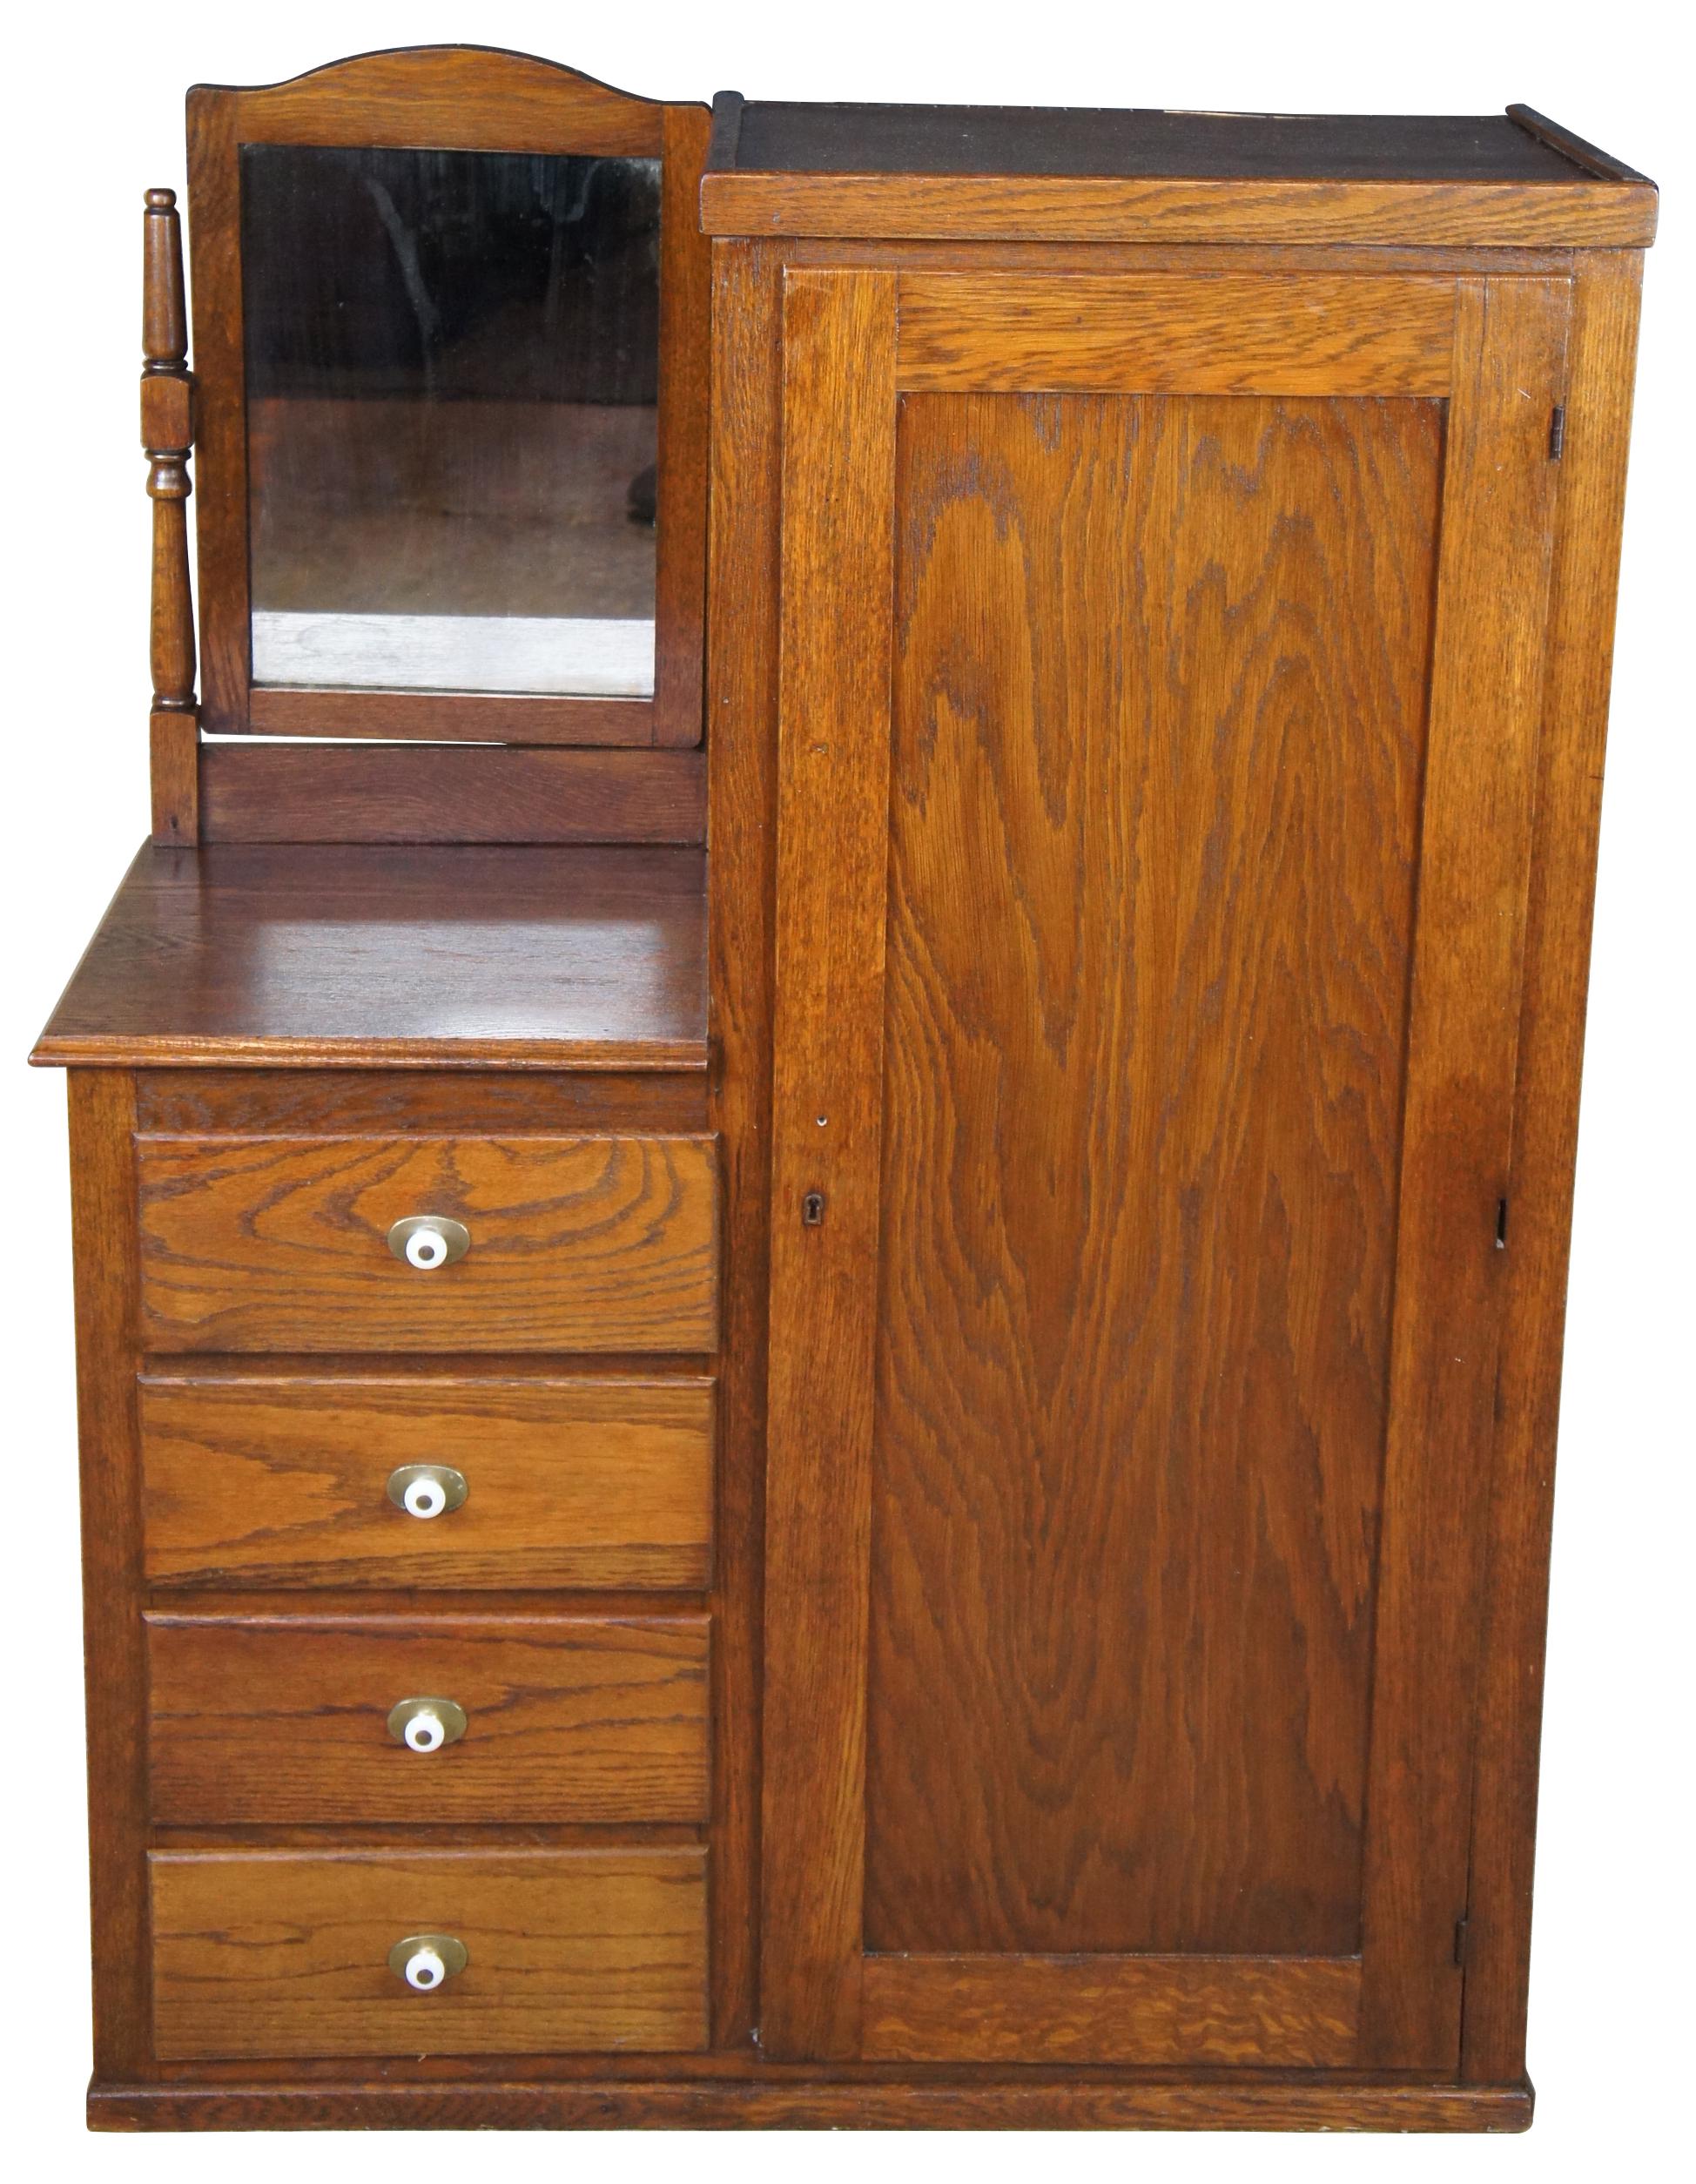 Oak chifforobe or armoire with porcelain knobs and mirror, circa 1930s. A chifforobe, also chiffarobe or chifferobe, is a closet-like piece of furniture that combines a long space for hanging clothes with a chest of drawers. Typically the wardrobe